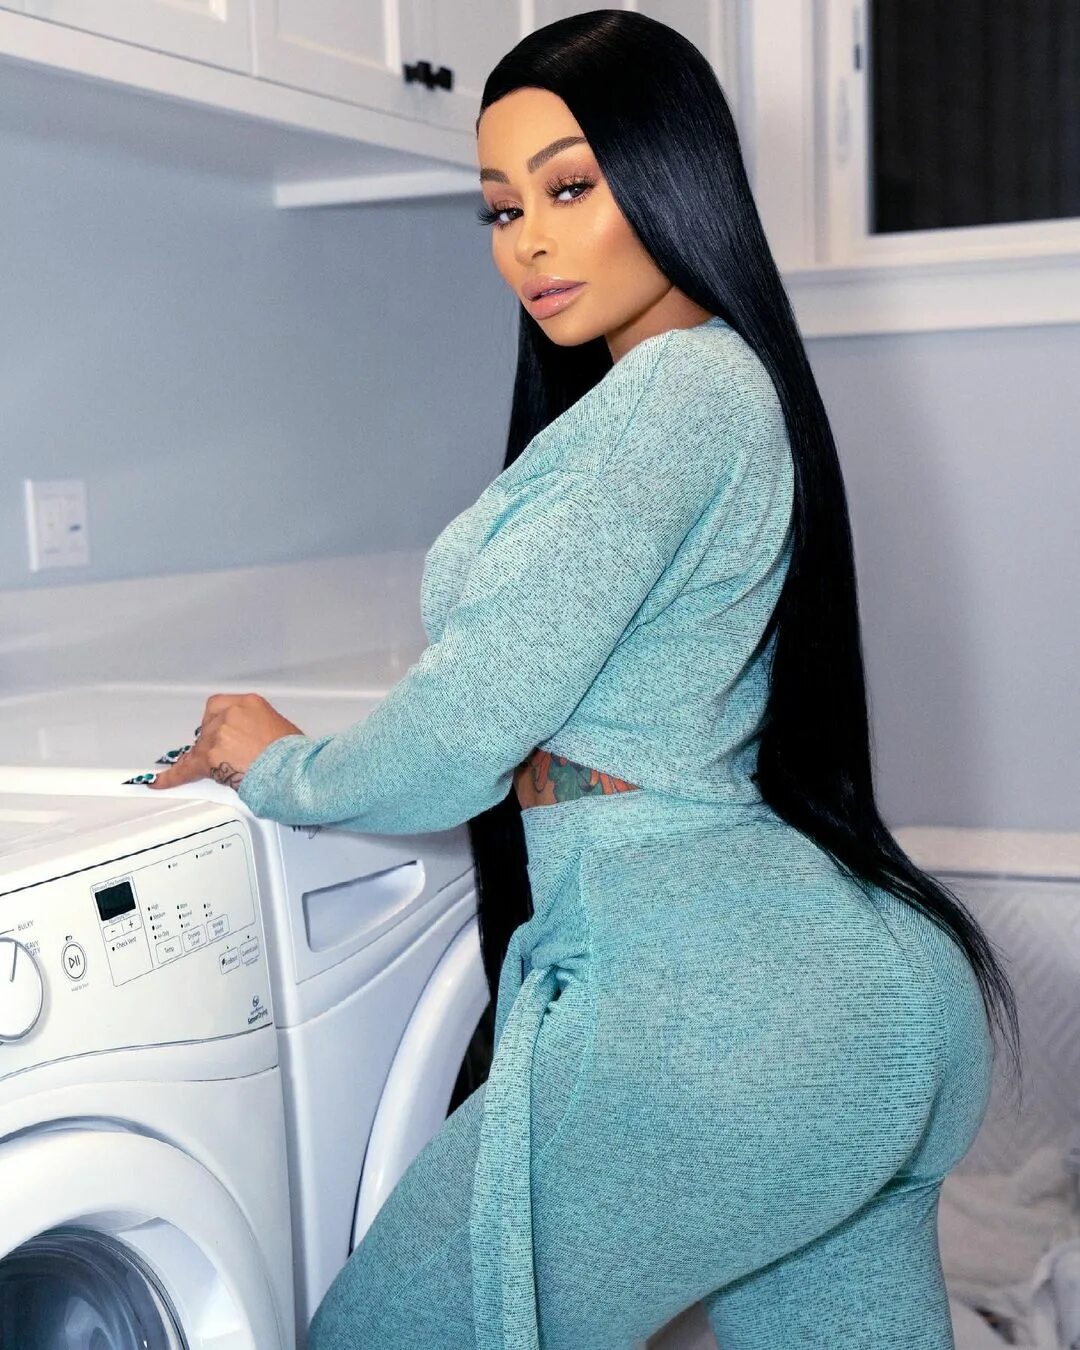 Blac Chyna 💋 в Instagram: "You letting me in to clean or nah? @fashio...